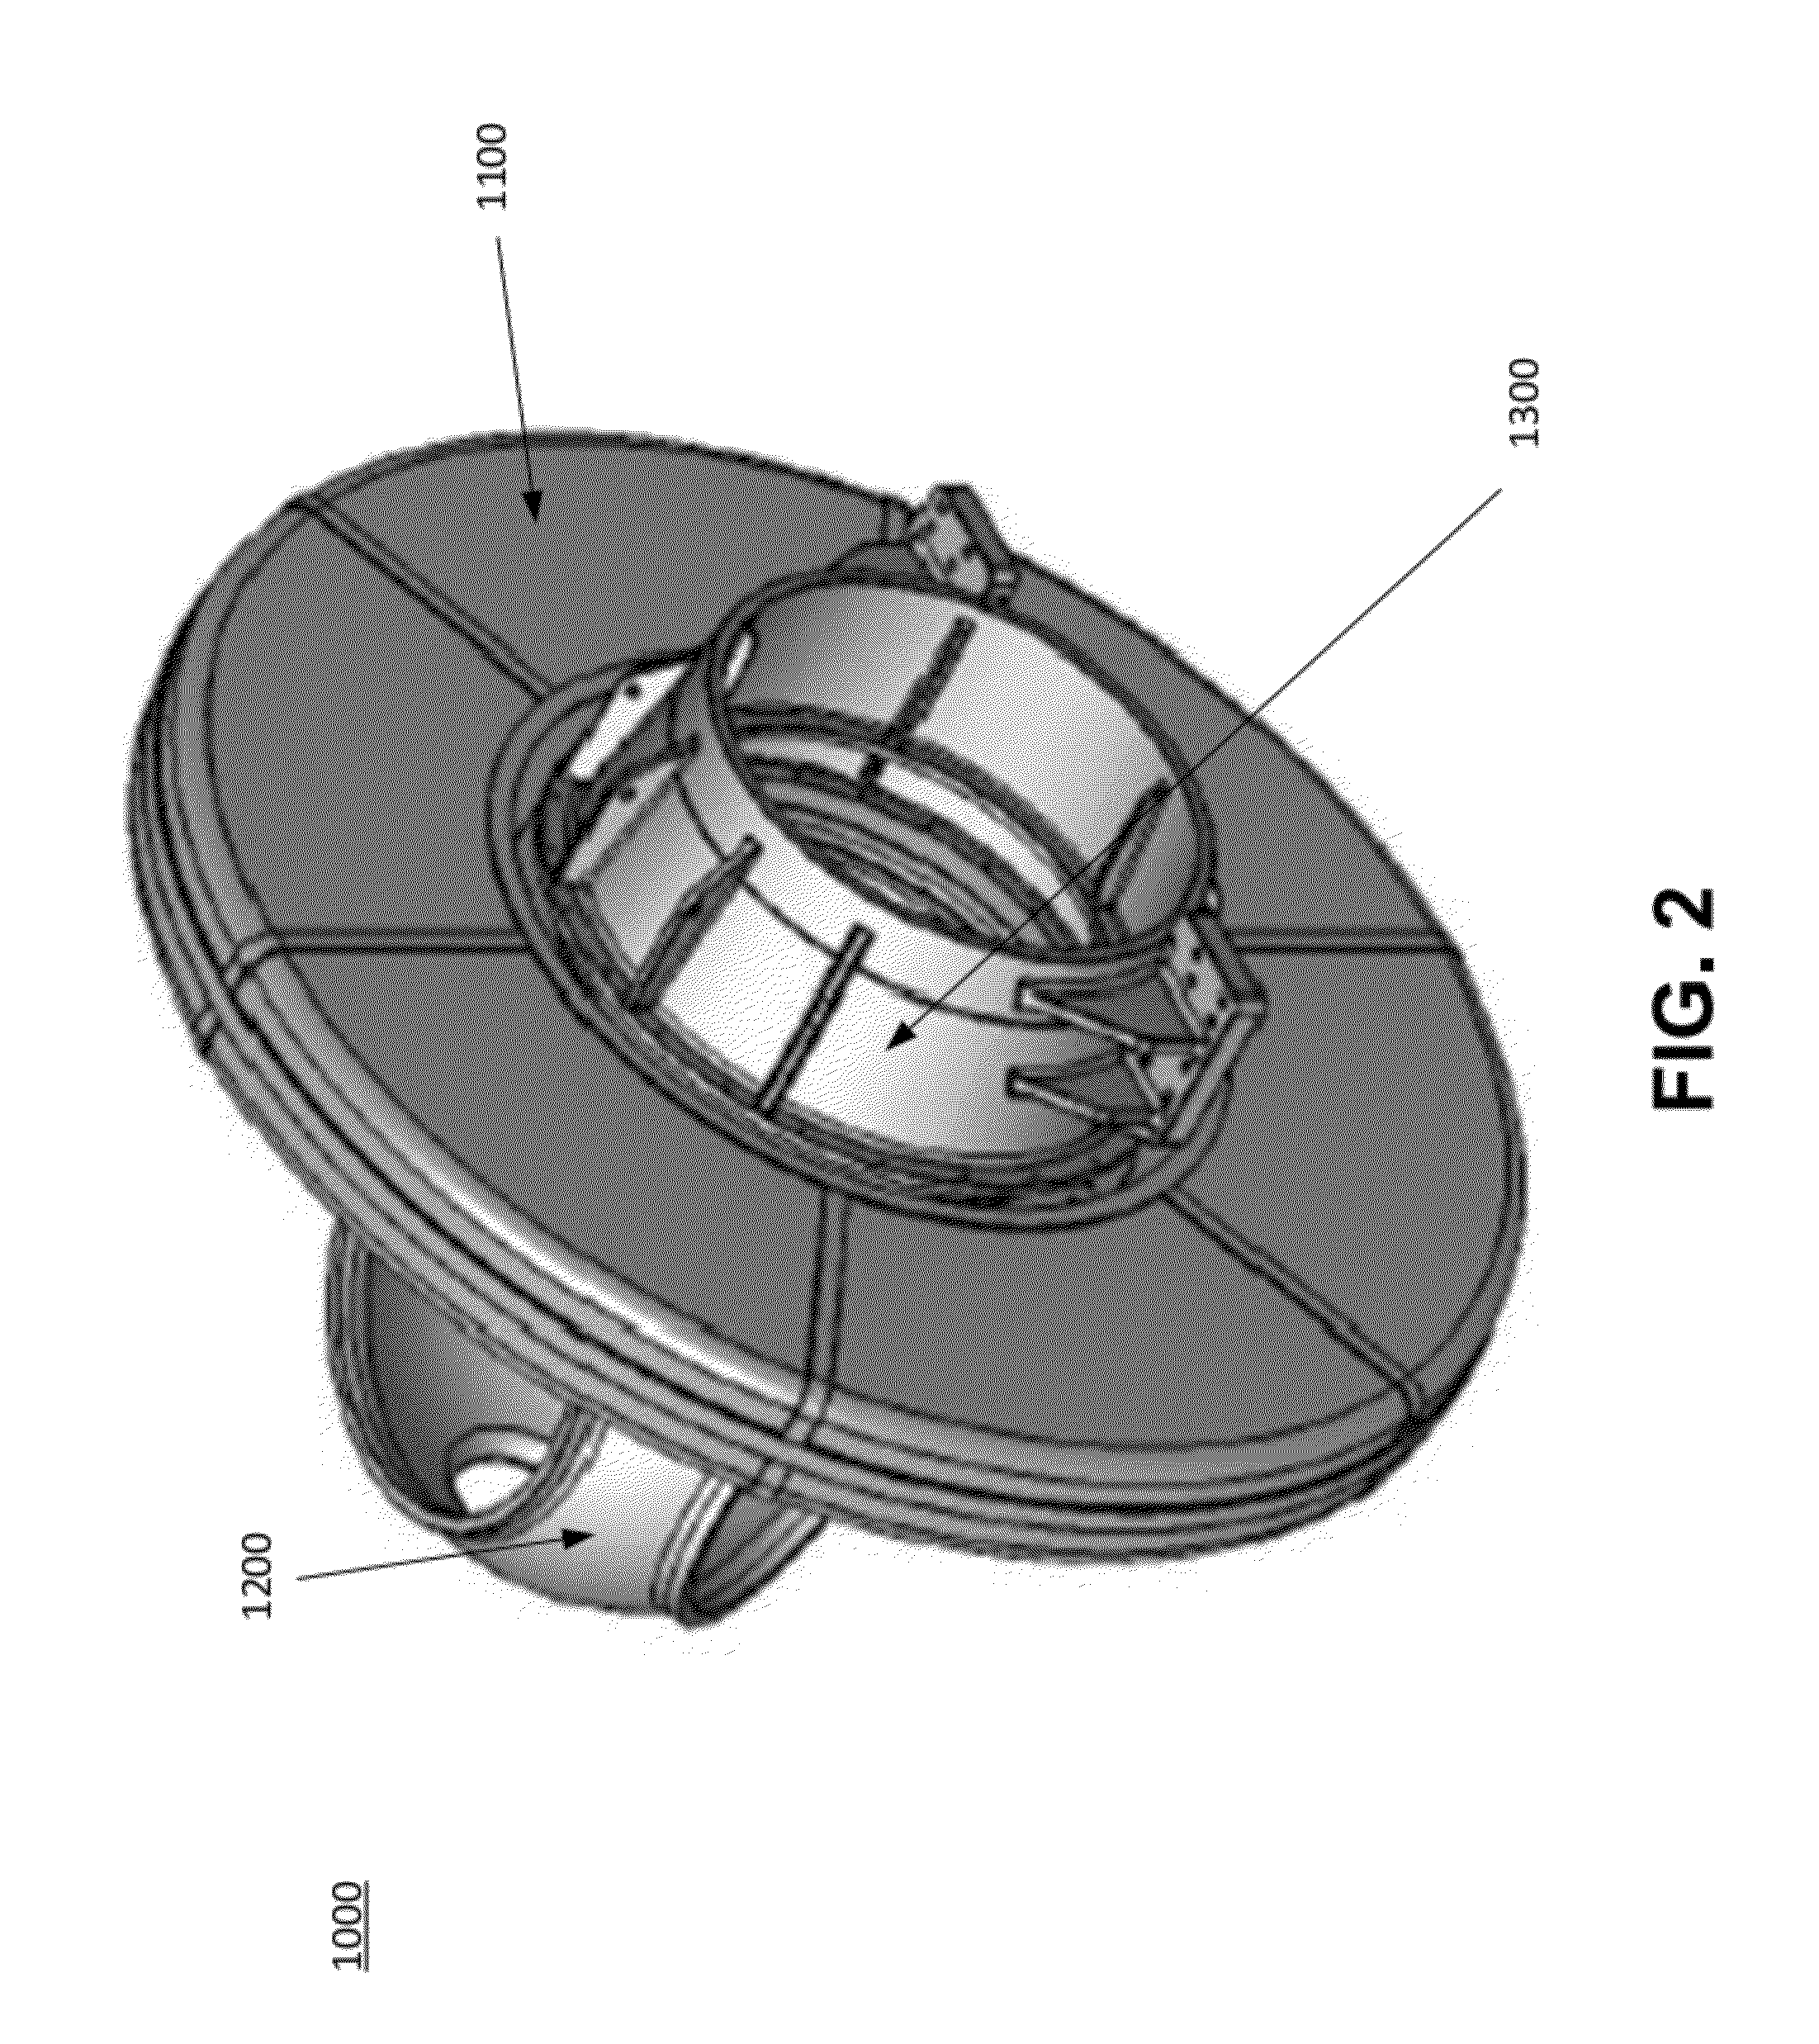 Systems and methods for improved direct drive generators